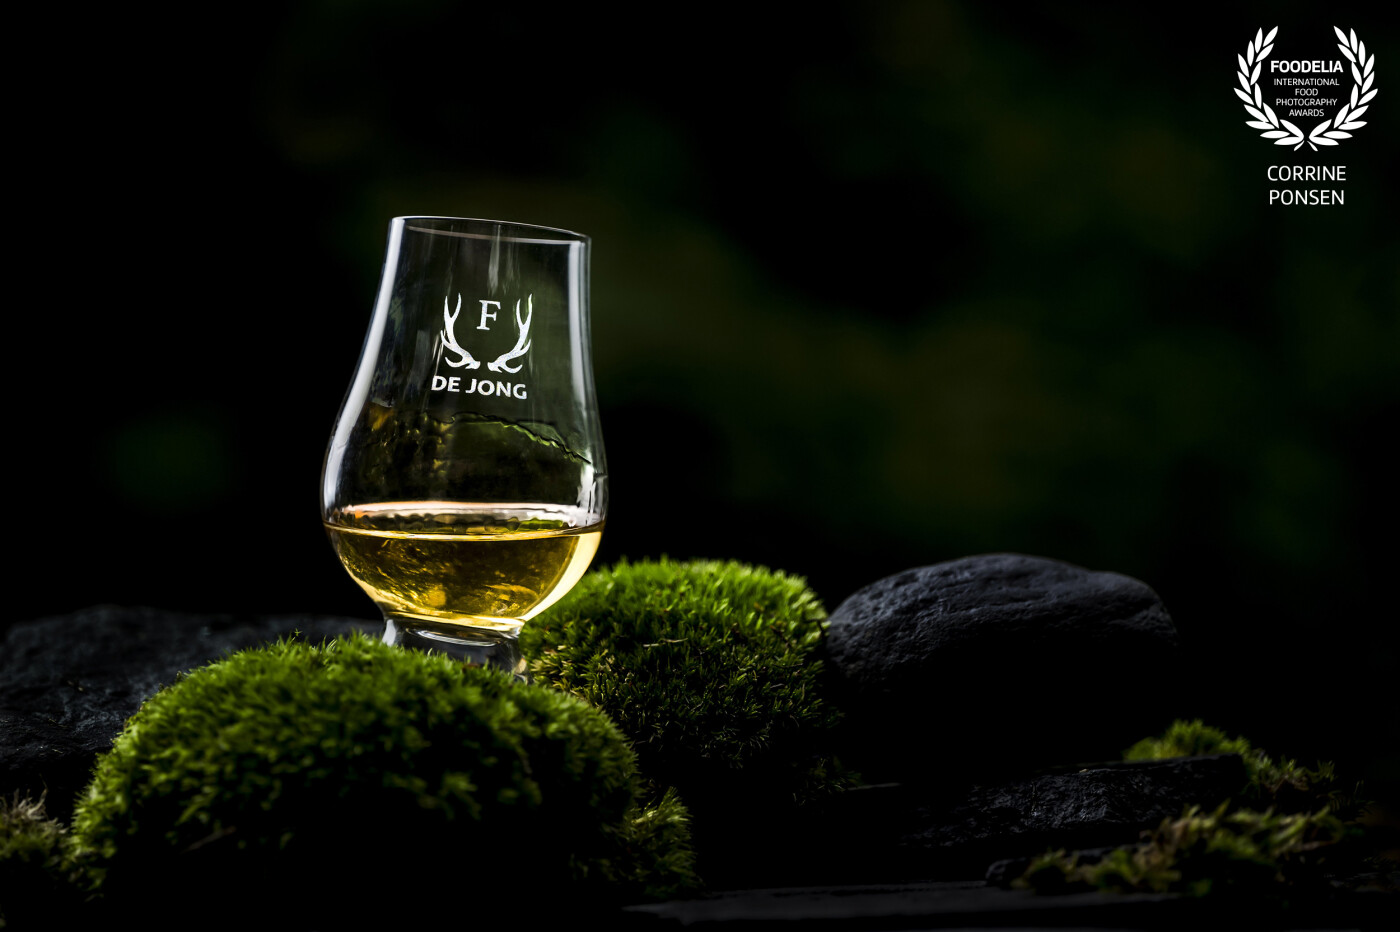 For several years I am making pictures for a client, who sell whiskey and wine glasses. This time the location is my own garden. I love to shoot in our beautiful green lush jungle garden. With just one flash as a backlight I take this picture. The rocks and the moss are placed on a wooden table, the wiskey is real, not a fake blend ad you can see how it stich to the glass. I used my 200 mm lens and shoot it on aperture 2.8 for a lovely bokeh background.